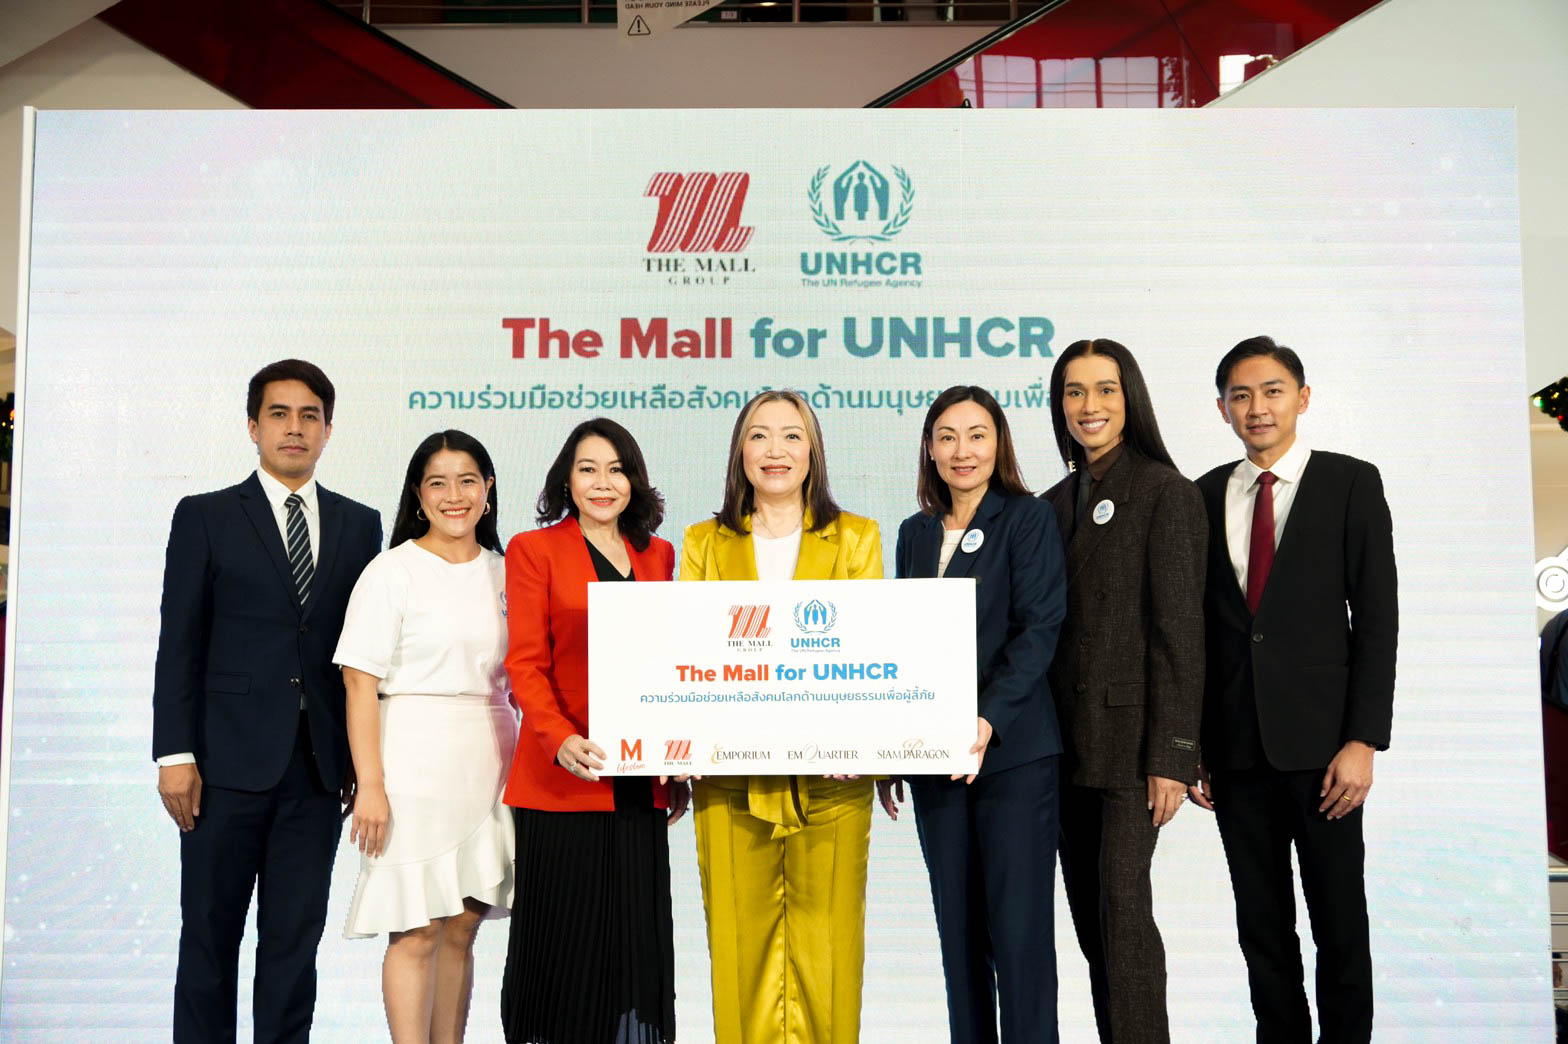 UNHCR and The Mall group launched ‘The Mall for UNHCR’ campaign to support global humanitarian assistance for refugees. © UNHCR/Punnat Suwanbodin